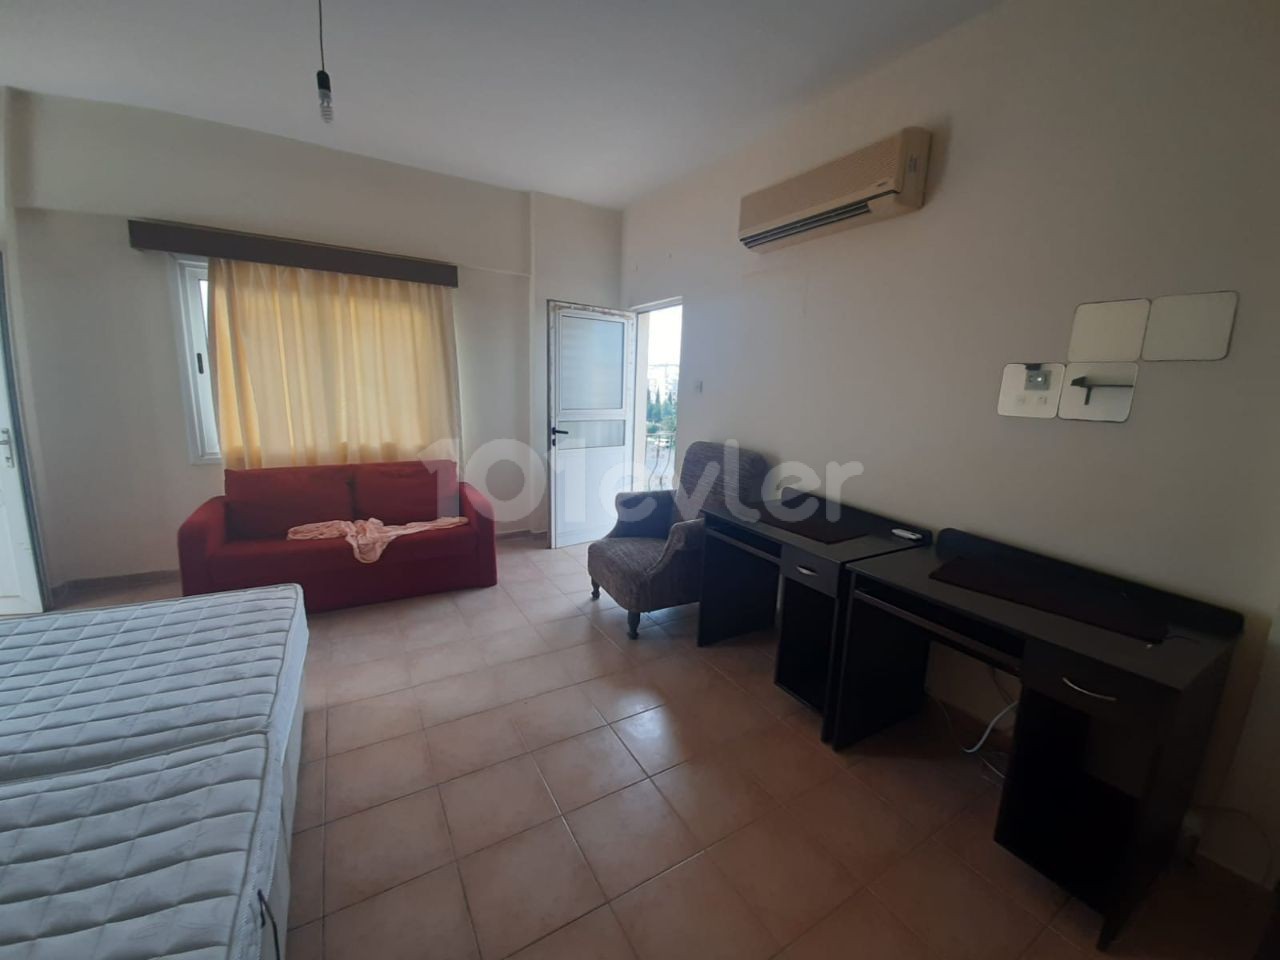 For rent in the center of Famagusta 6 months rent for 6 months £ 840 for 6 months deposit £ 140 and 1500 tl for 6 months water fee deposit commision 4. there is no elevator on the 4th floor. water 6 months 1500 tl electricity filtering meter